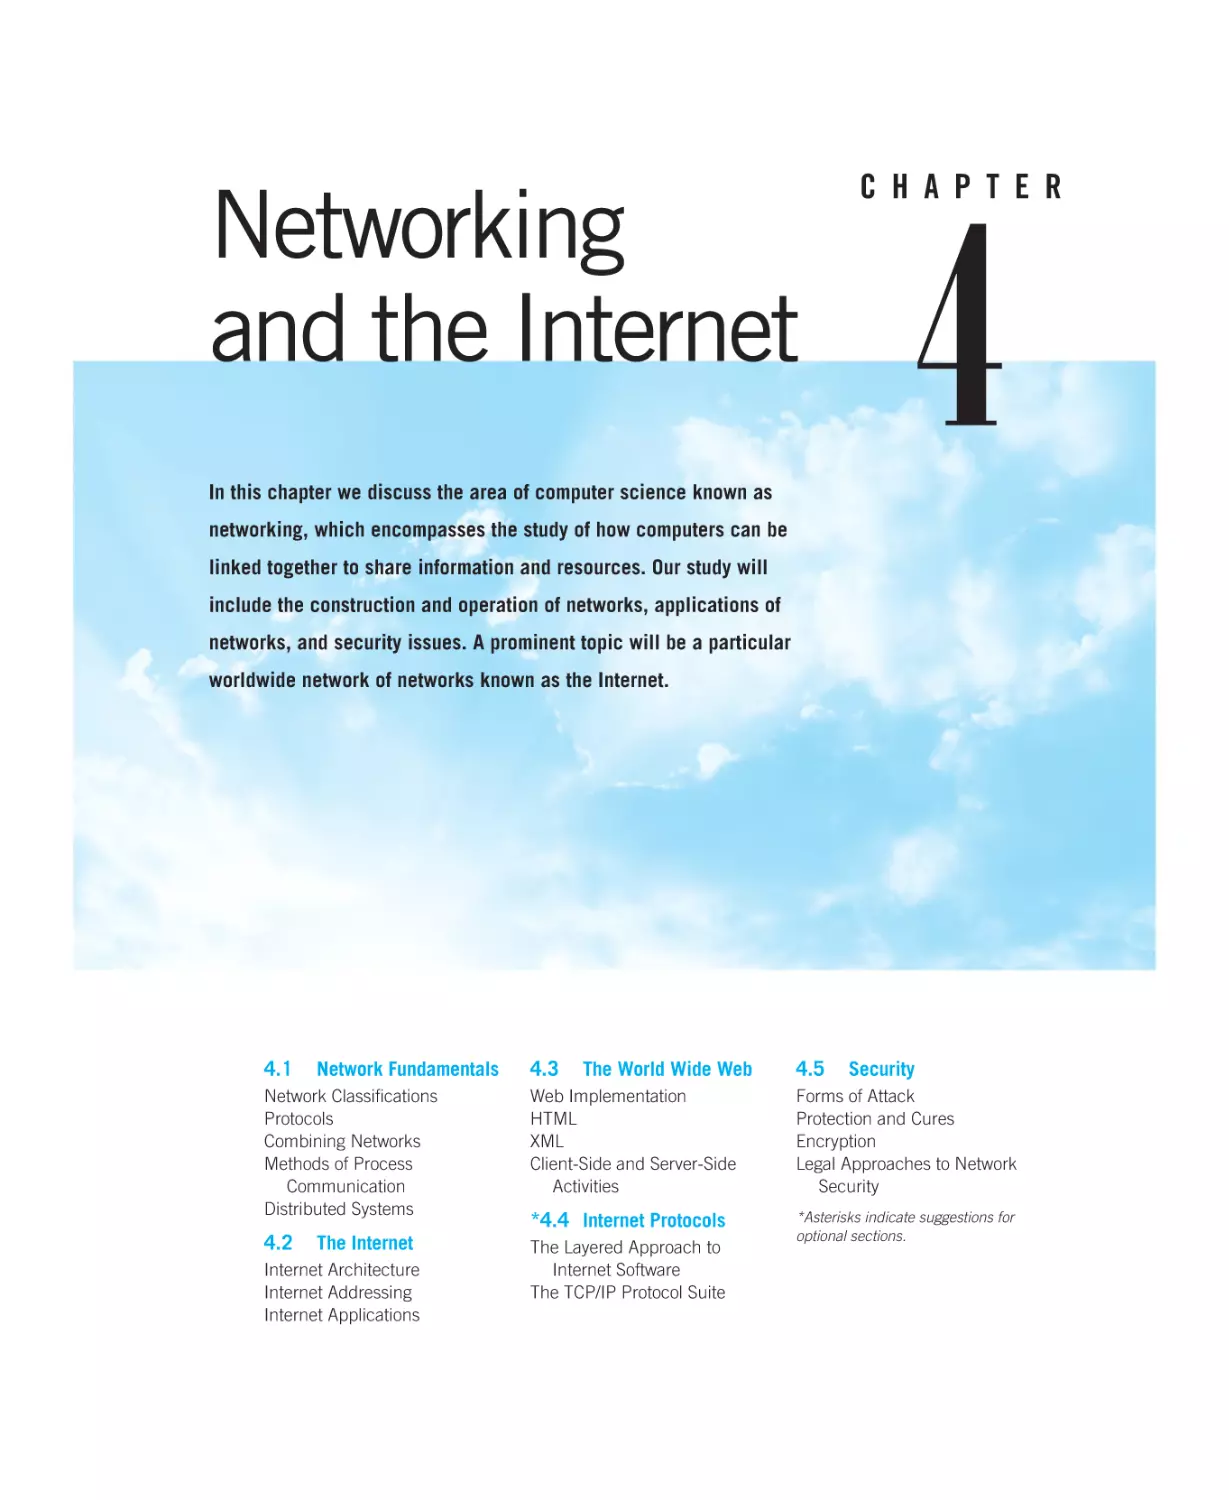 Chapter 4 Networking and the Internet